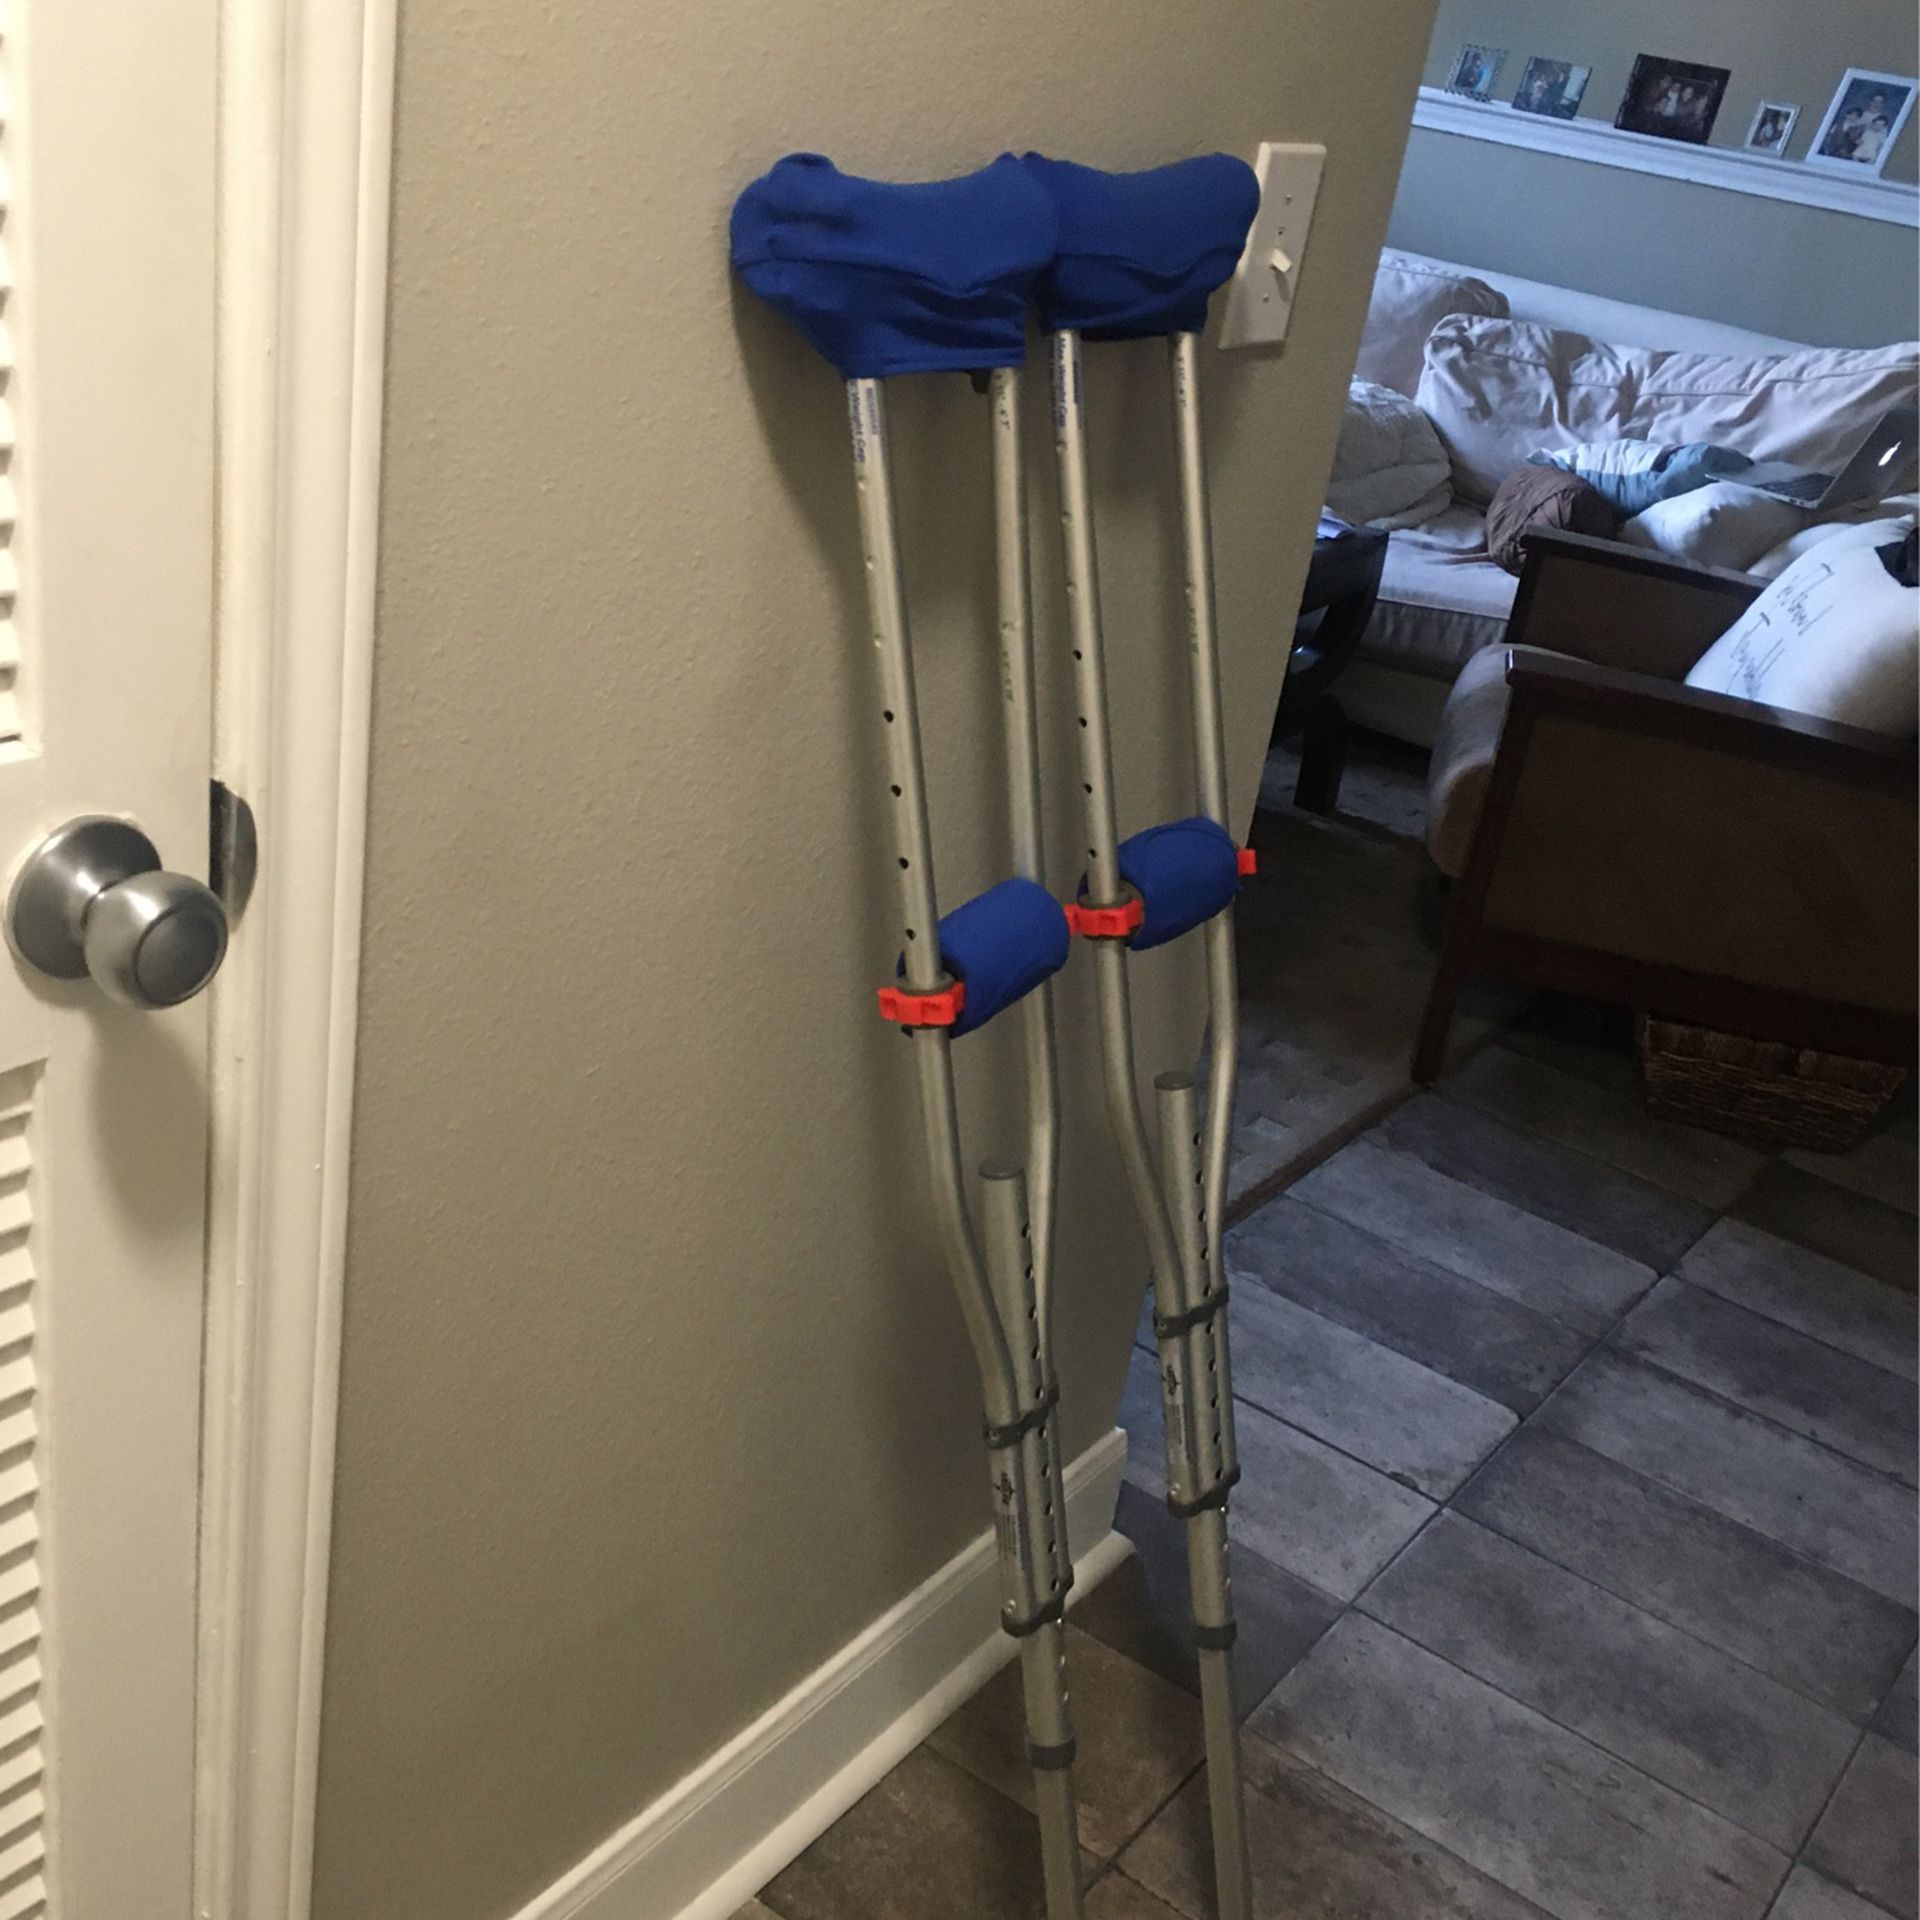 Crutches With Extra Padding